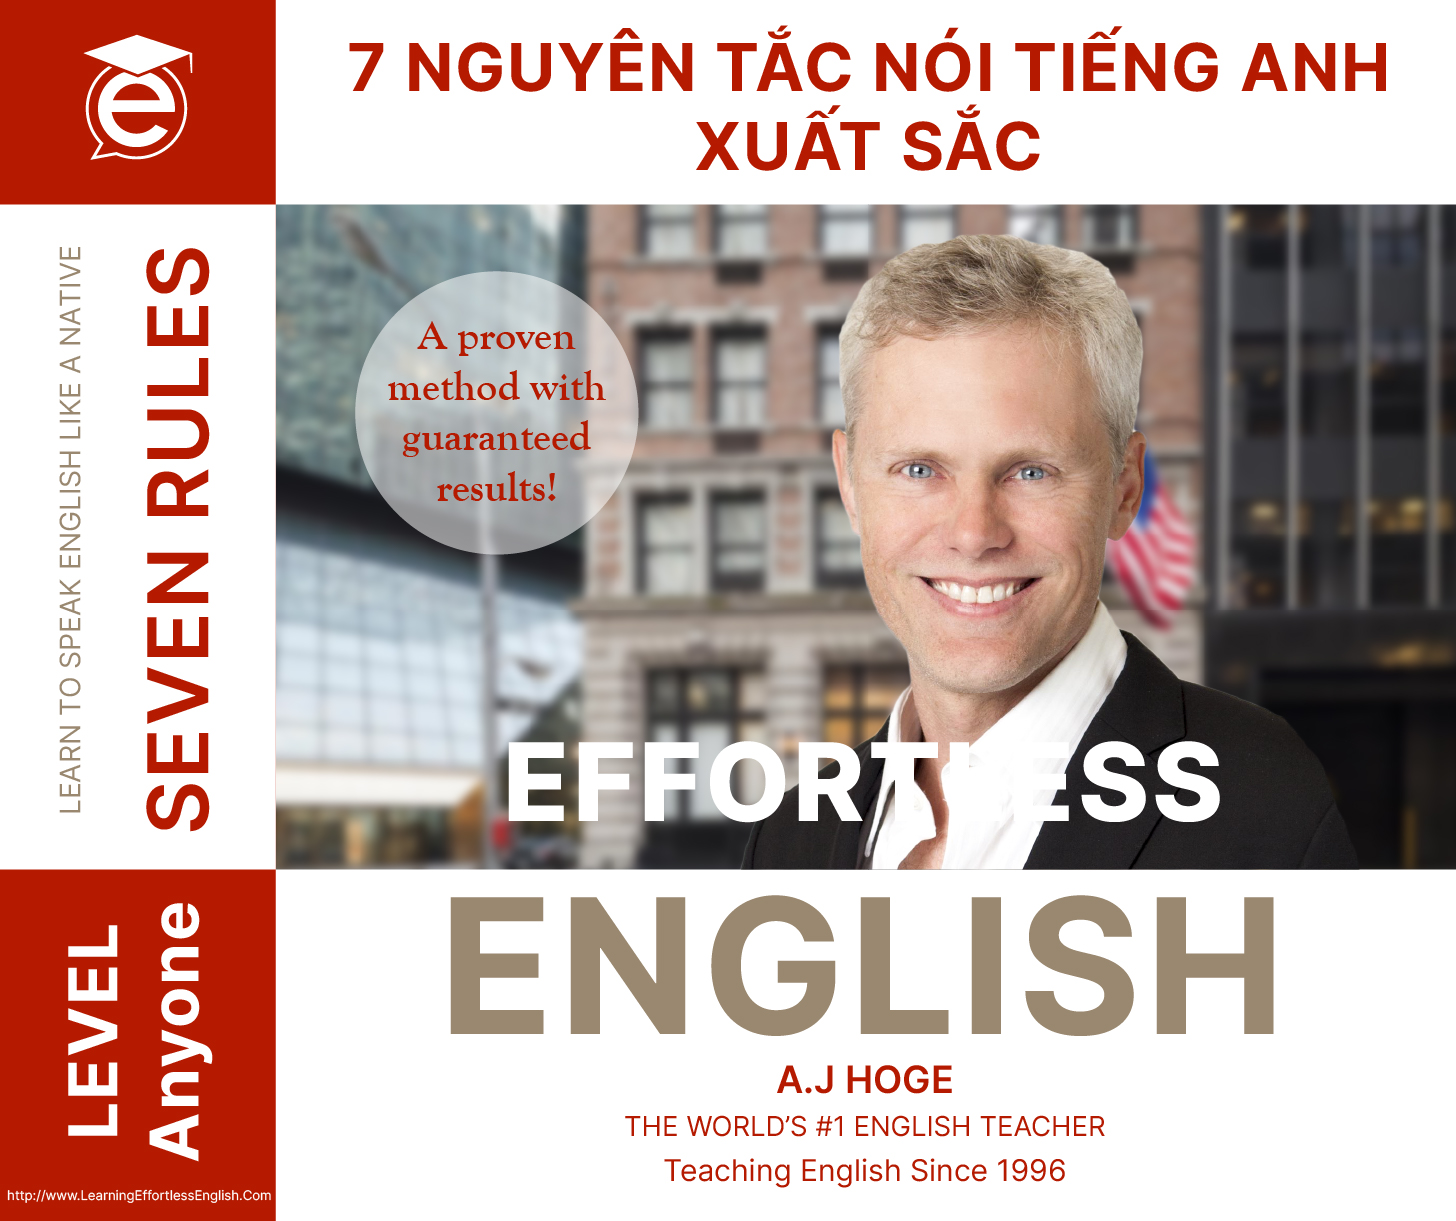 7 rules to excellent English speaking